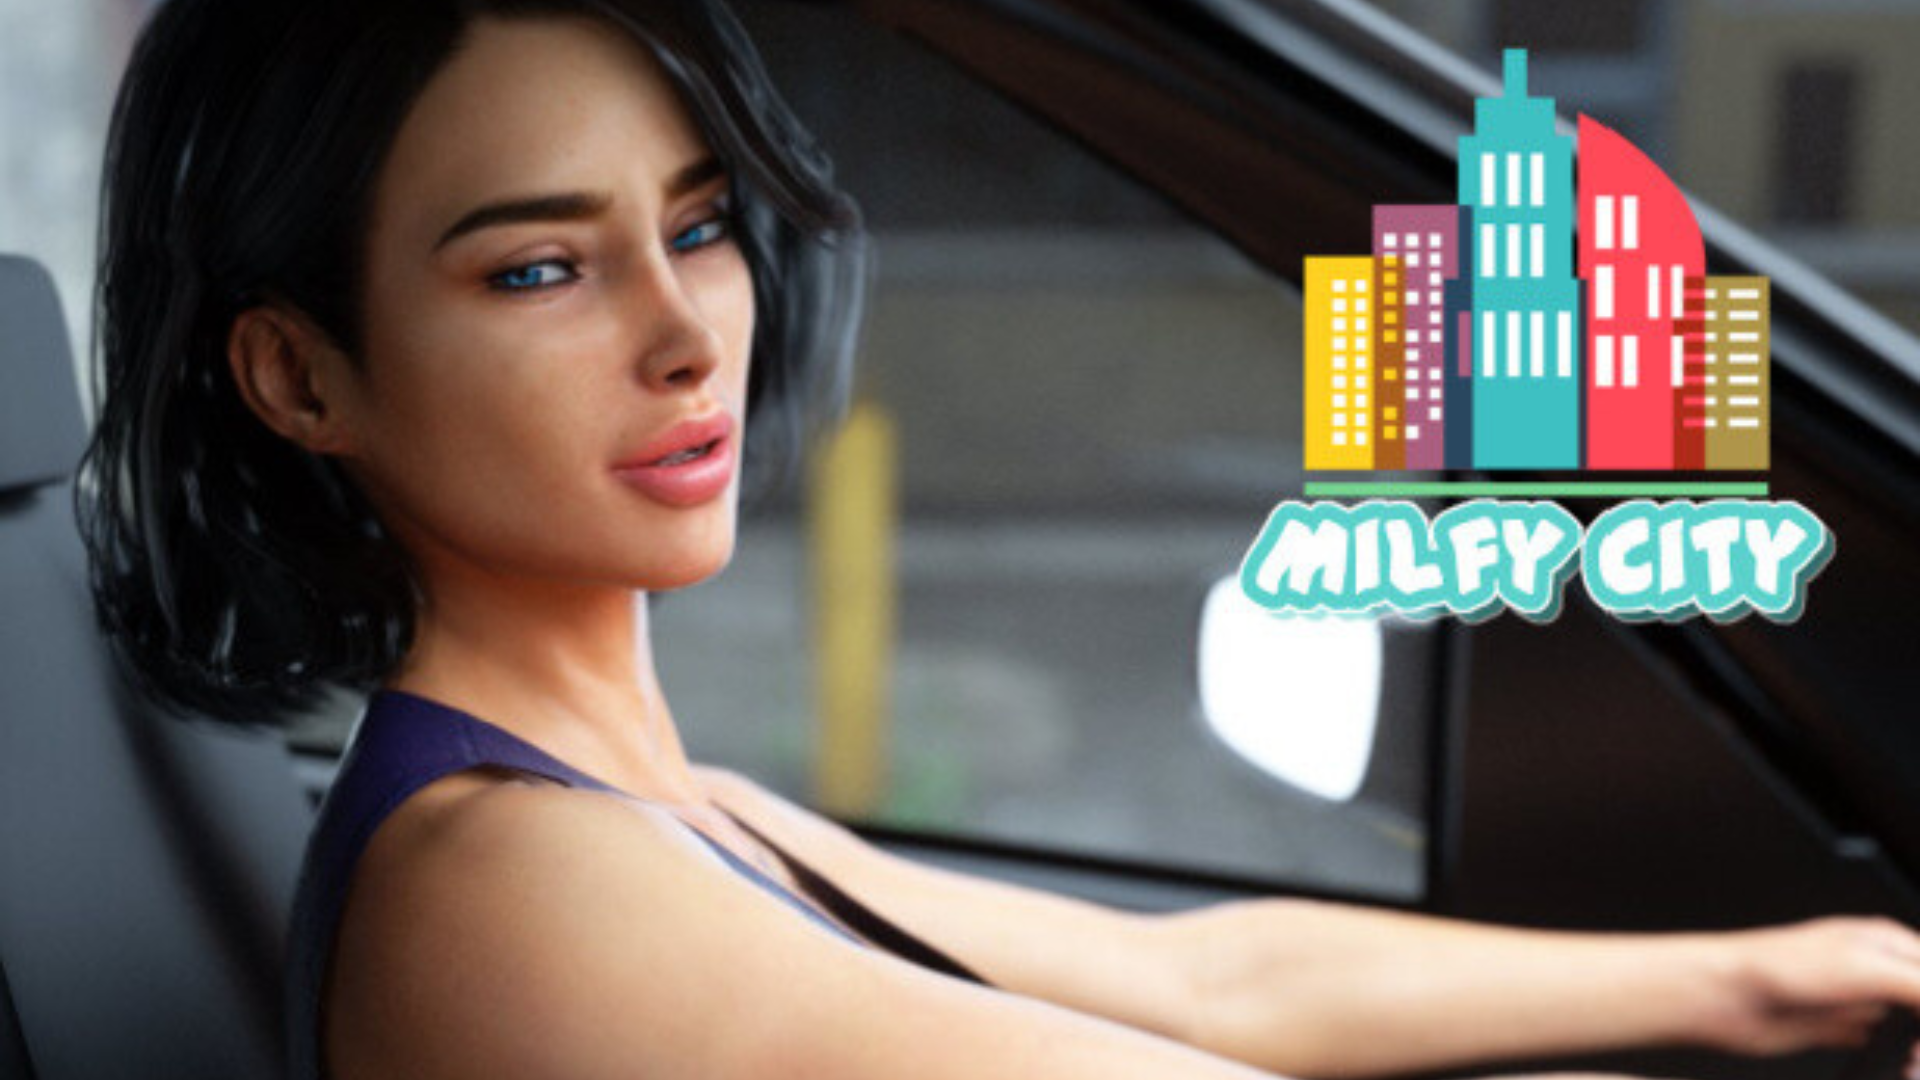 danielle neeson recommends milfy city full version pic